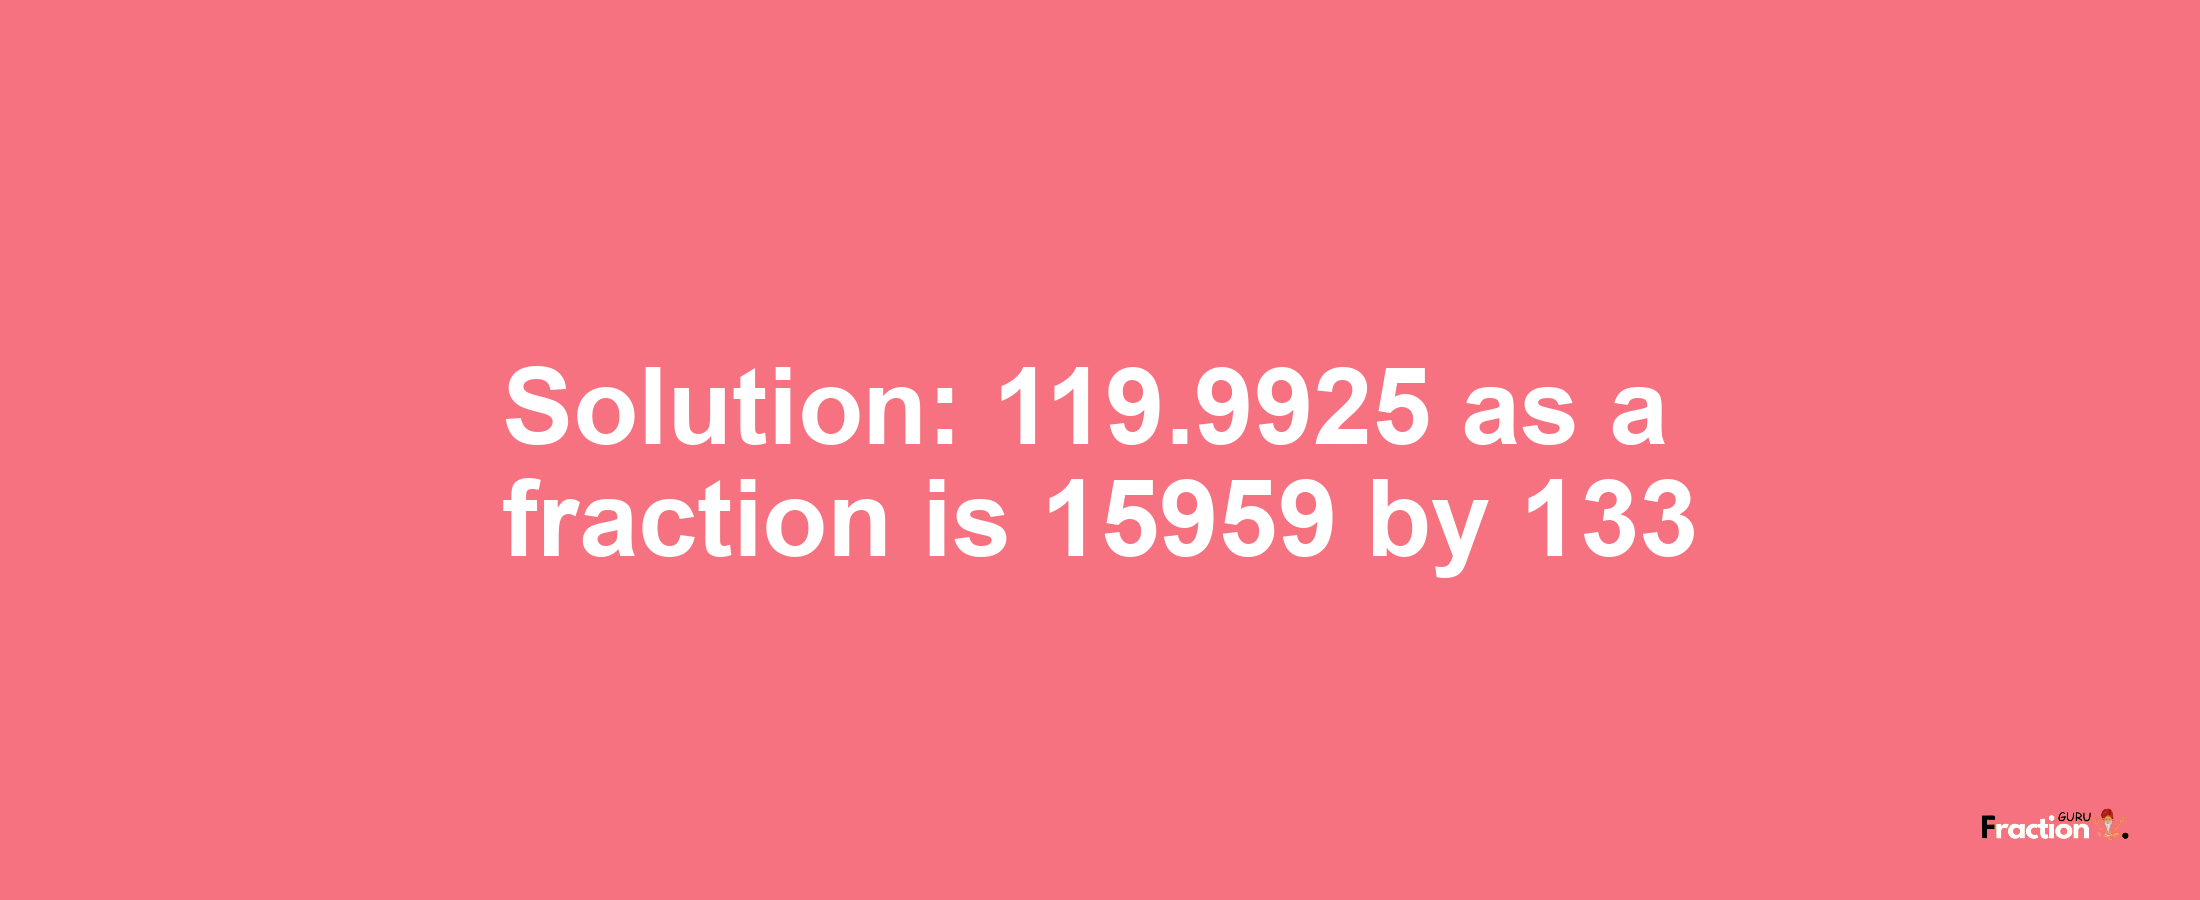 Solution:119.9925 as a fraction is 15959/133